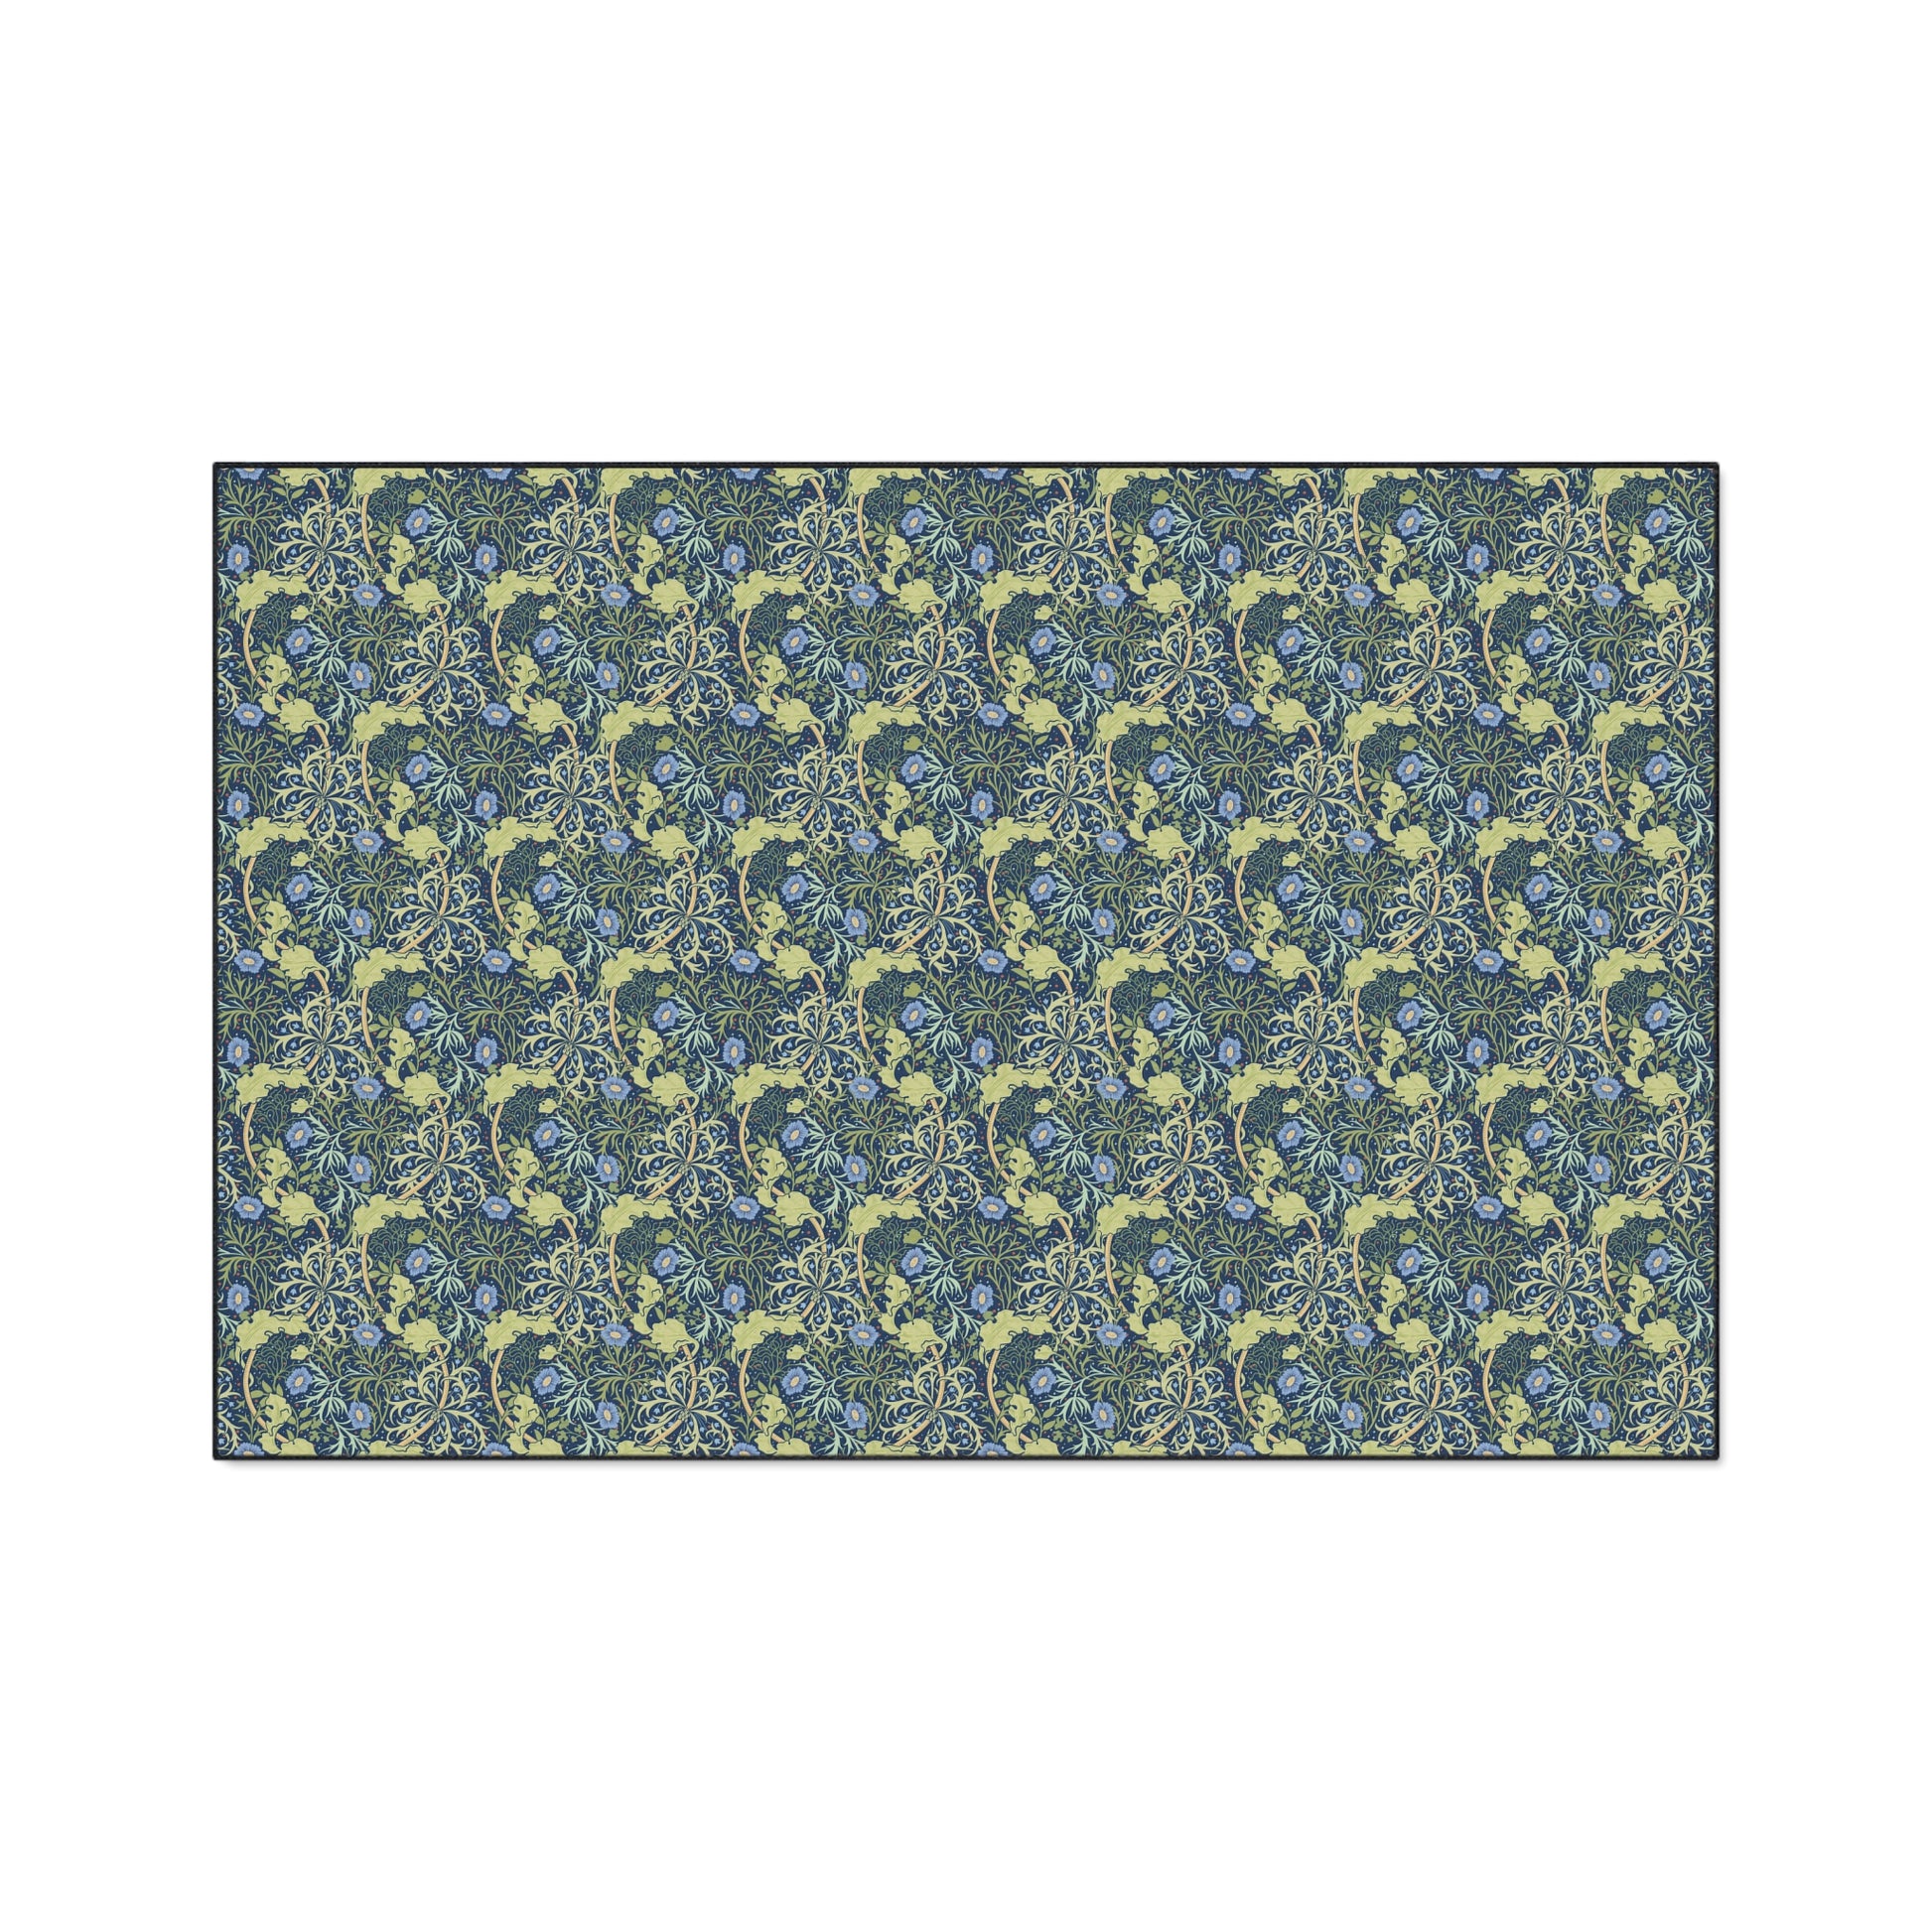 william-morris-co-heavy-duty-floor-mat-seaweed-collection-blue-flowers-1